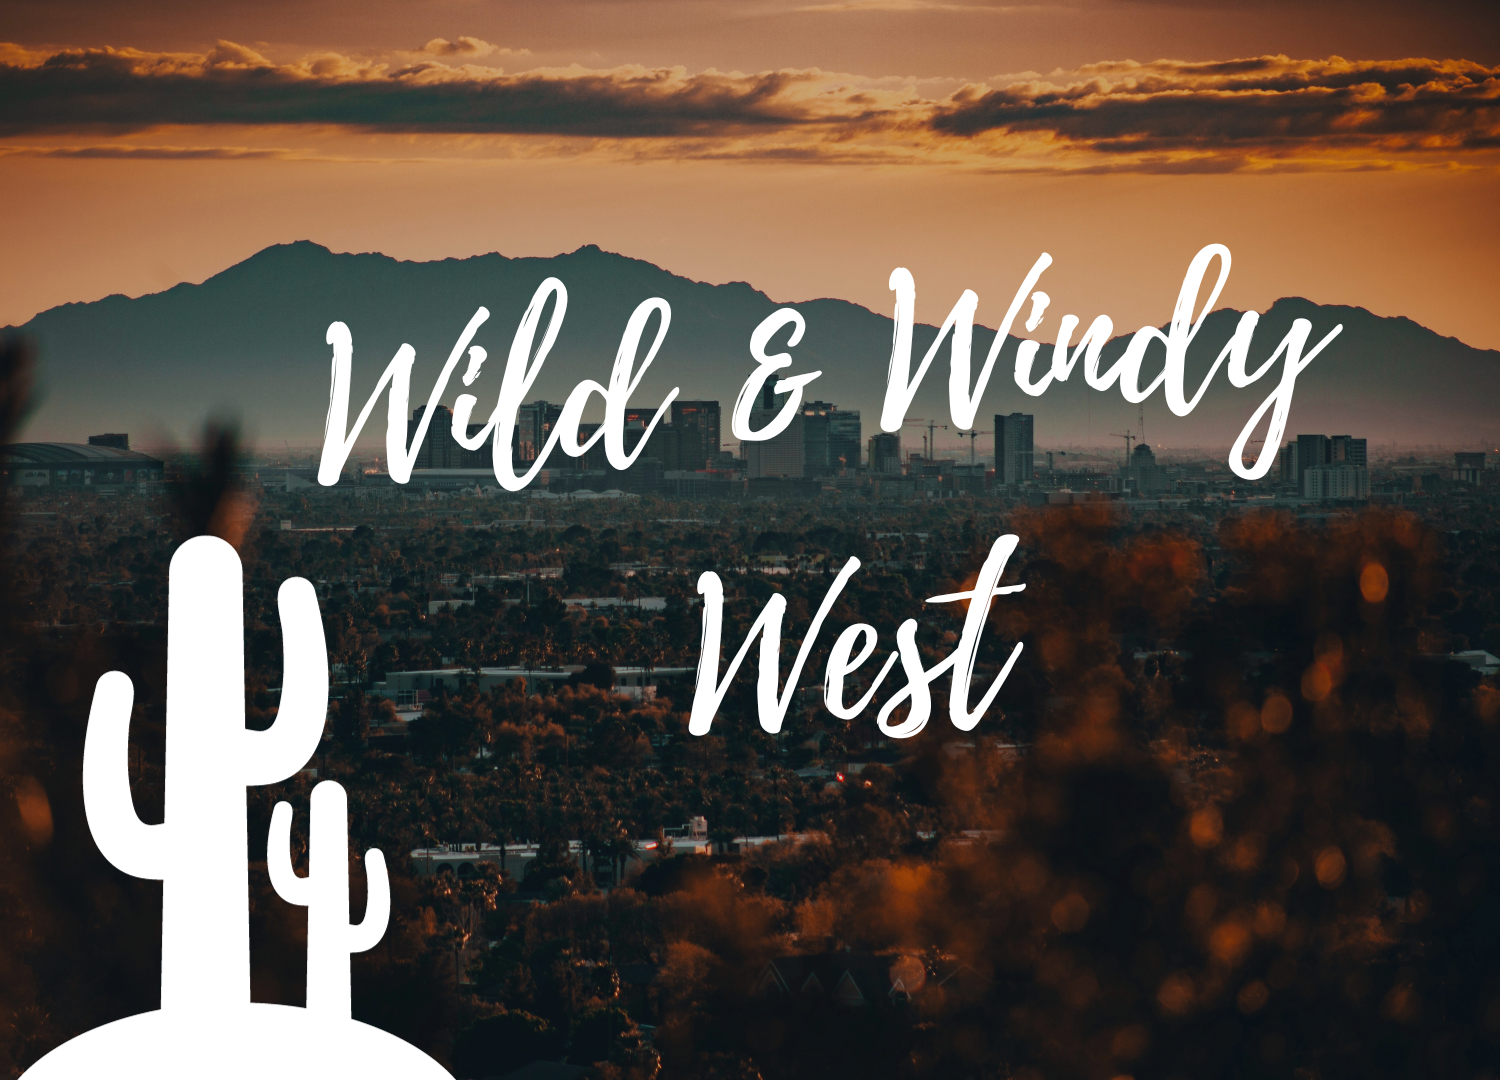 RomaWild and Windy West